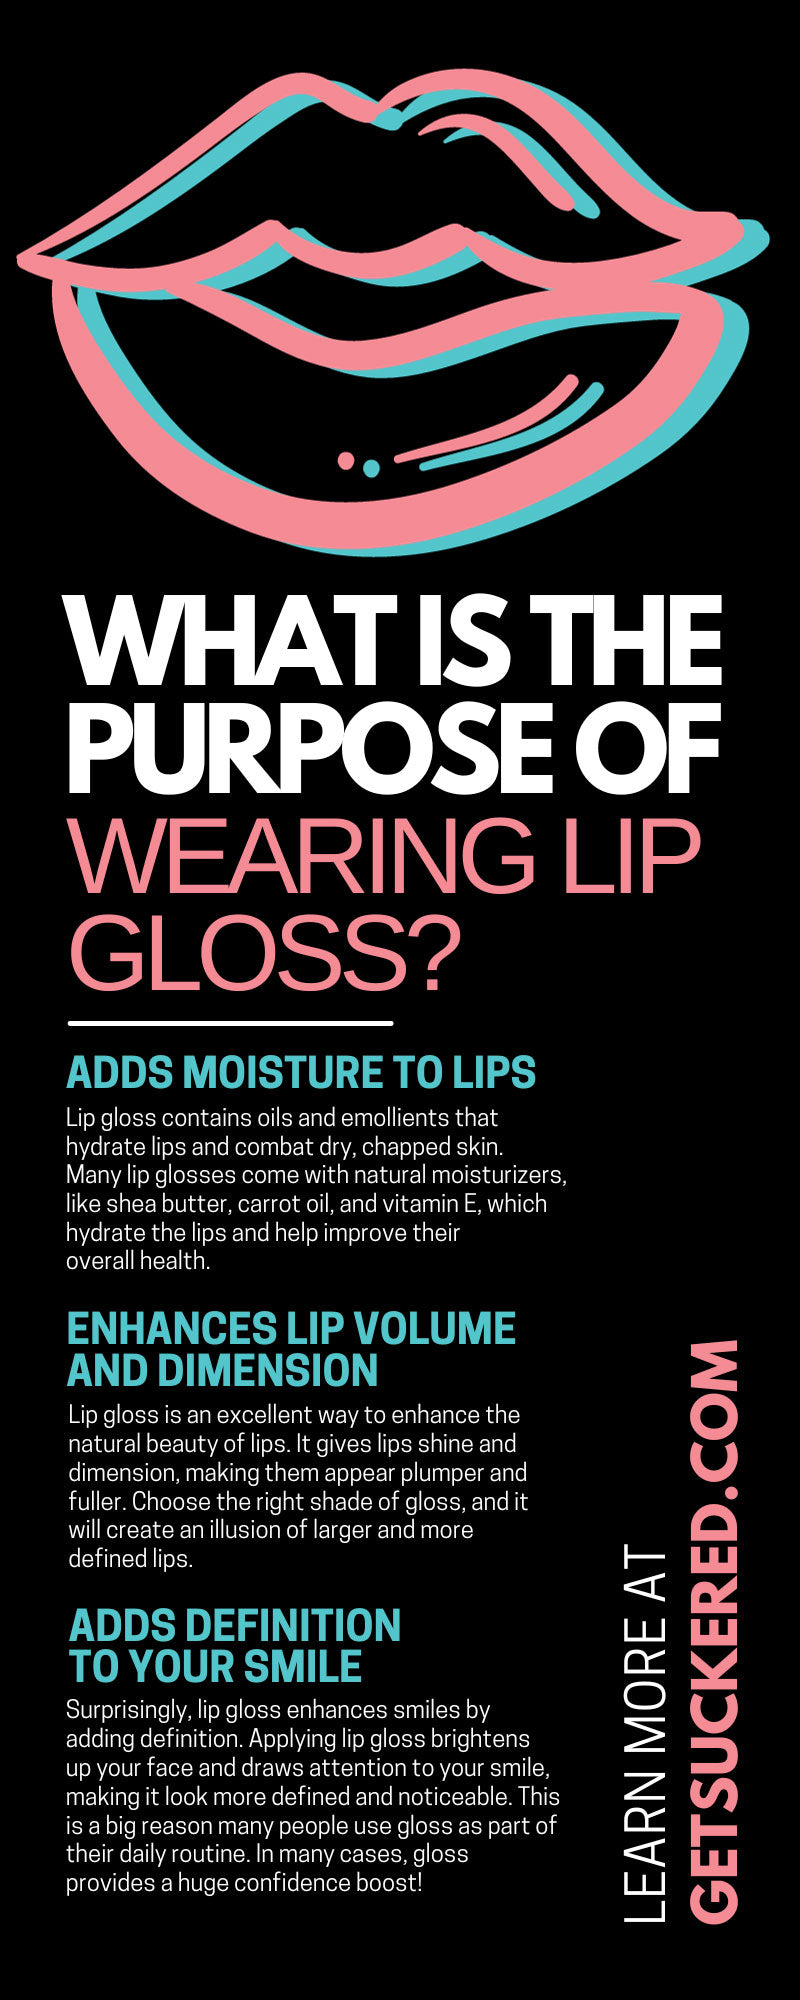 What Is the Purpose of Wearing Lip Gloss?